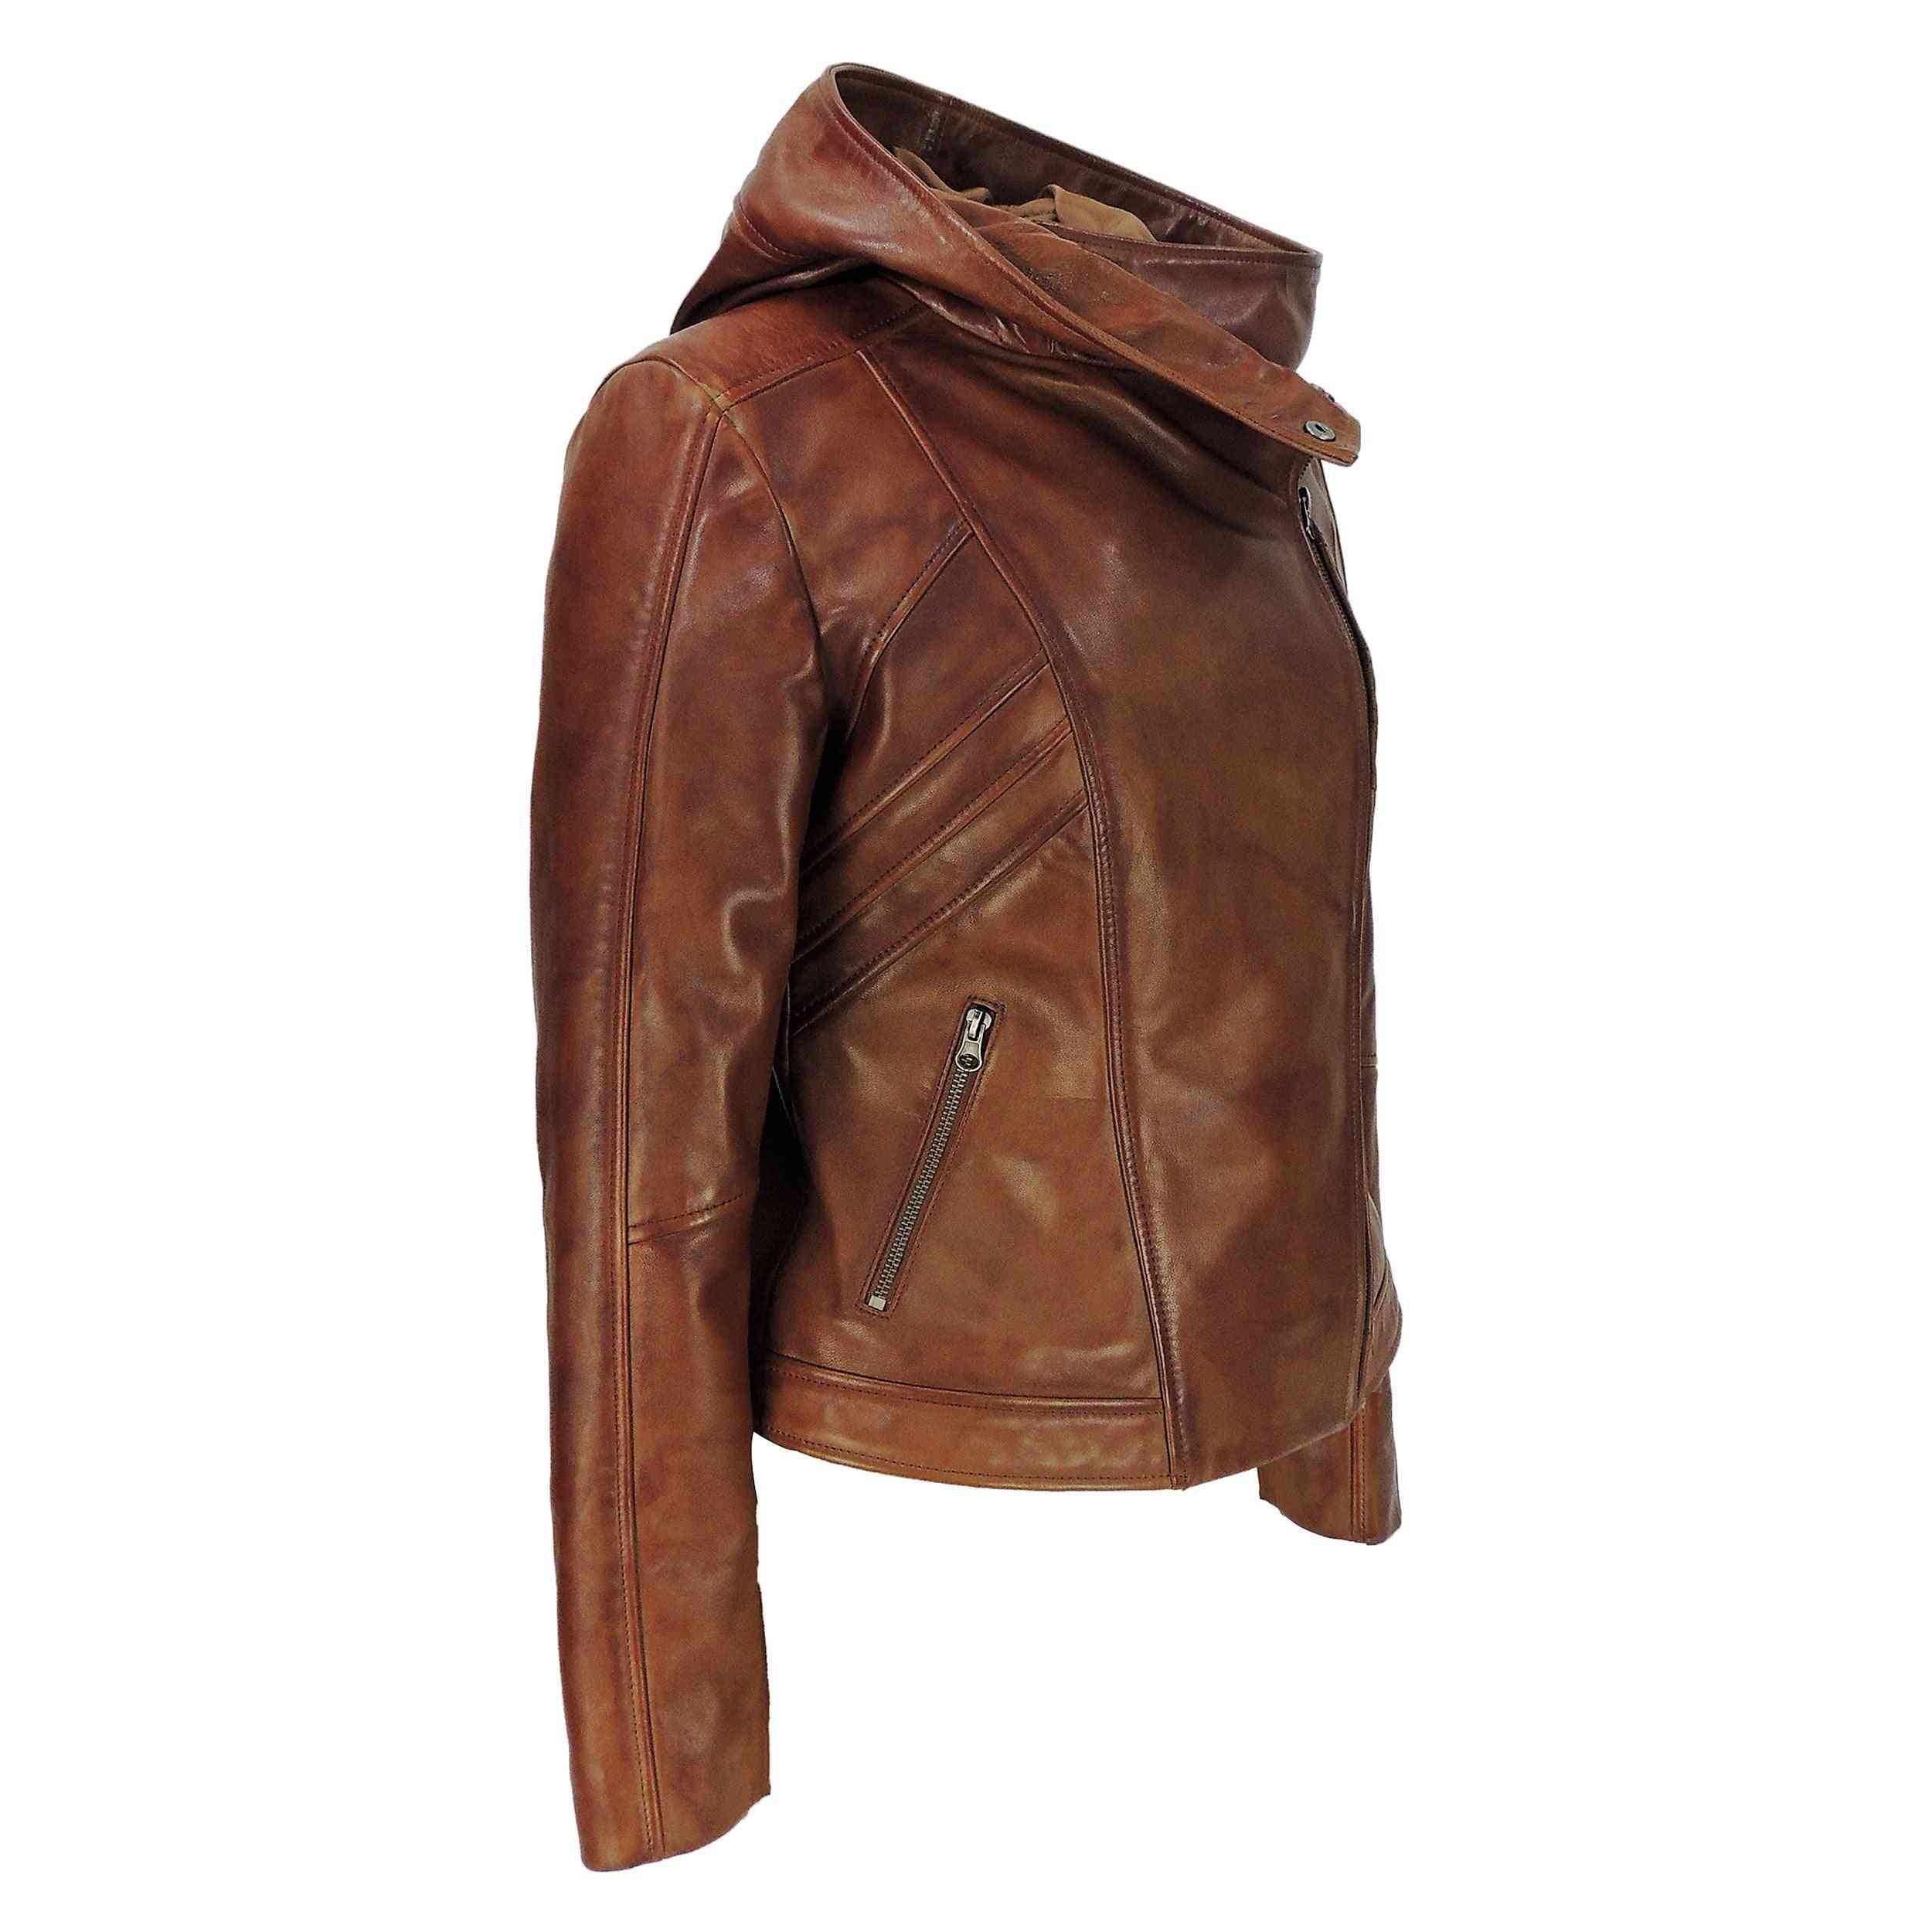 Womens Hooded Leather Jacket